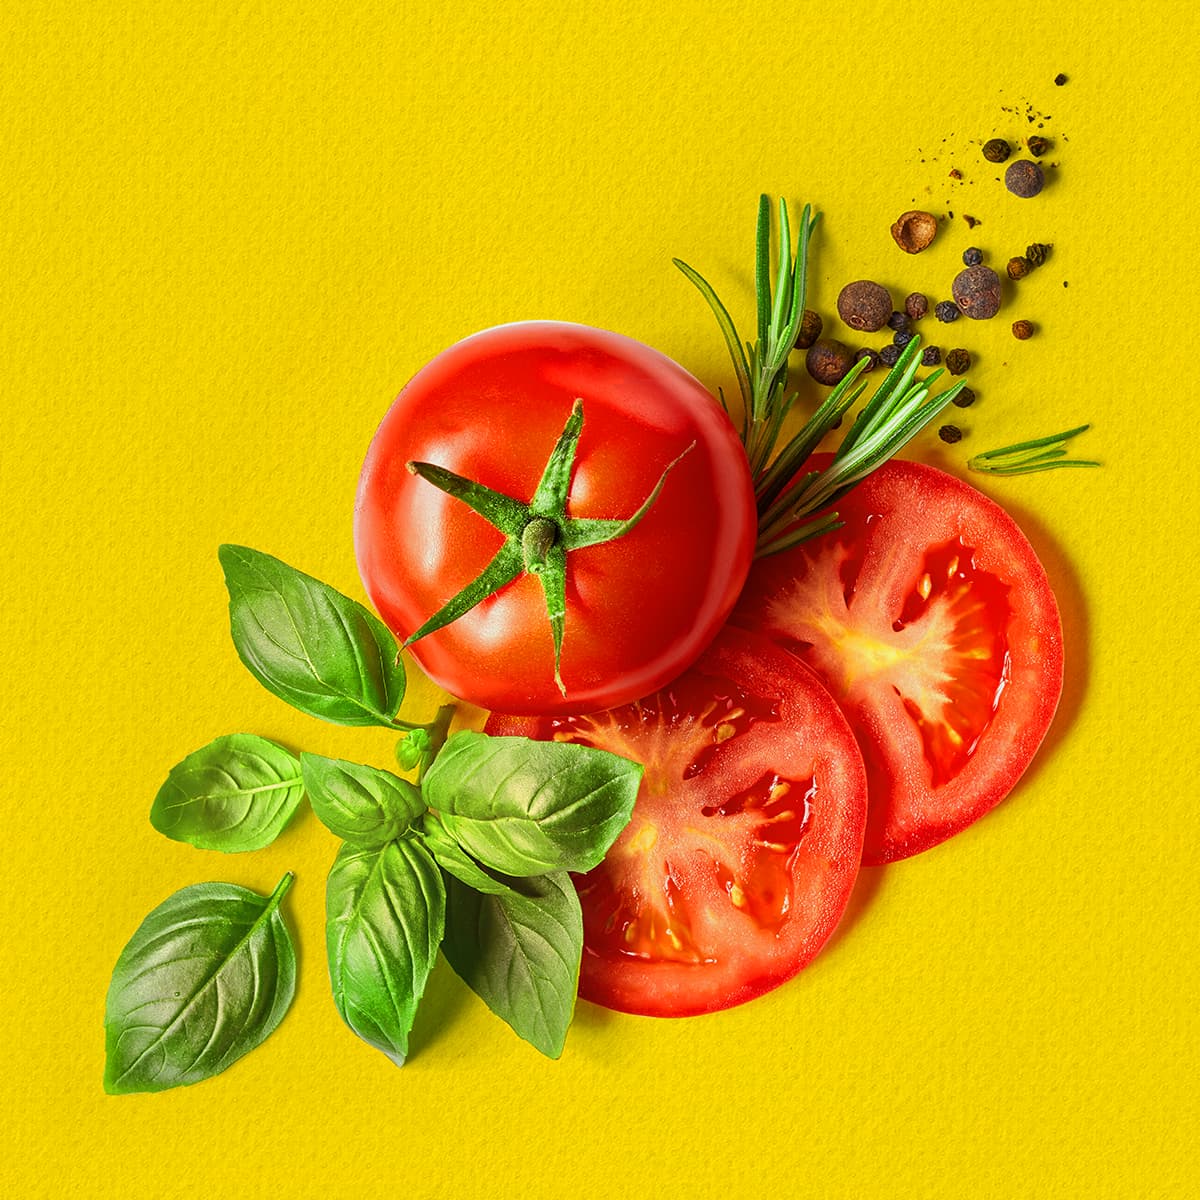 boxer-and-co-maggi-tomatoes-tomato-basil-pepper-yellow-ingredients-fresh-natural-flavour